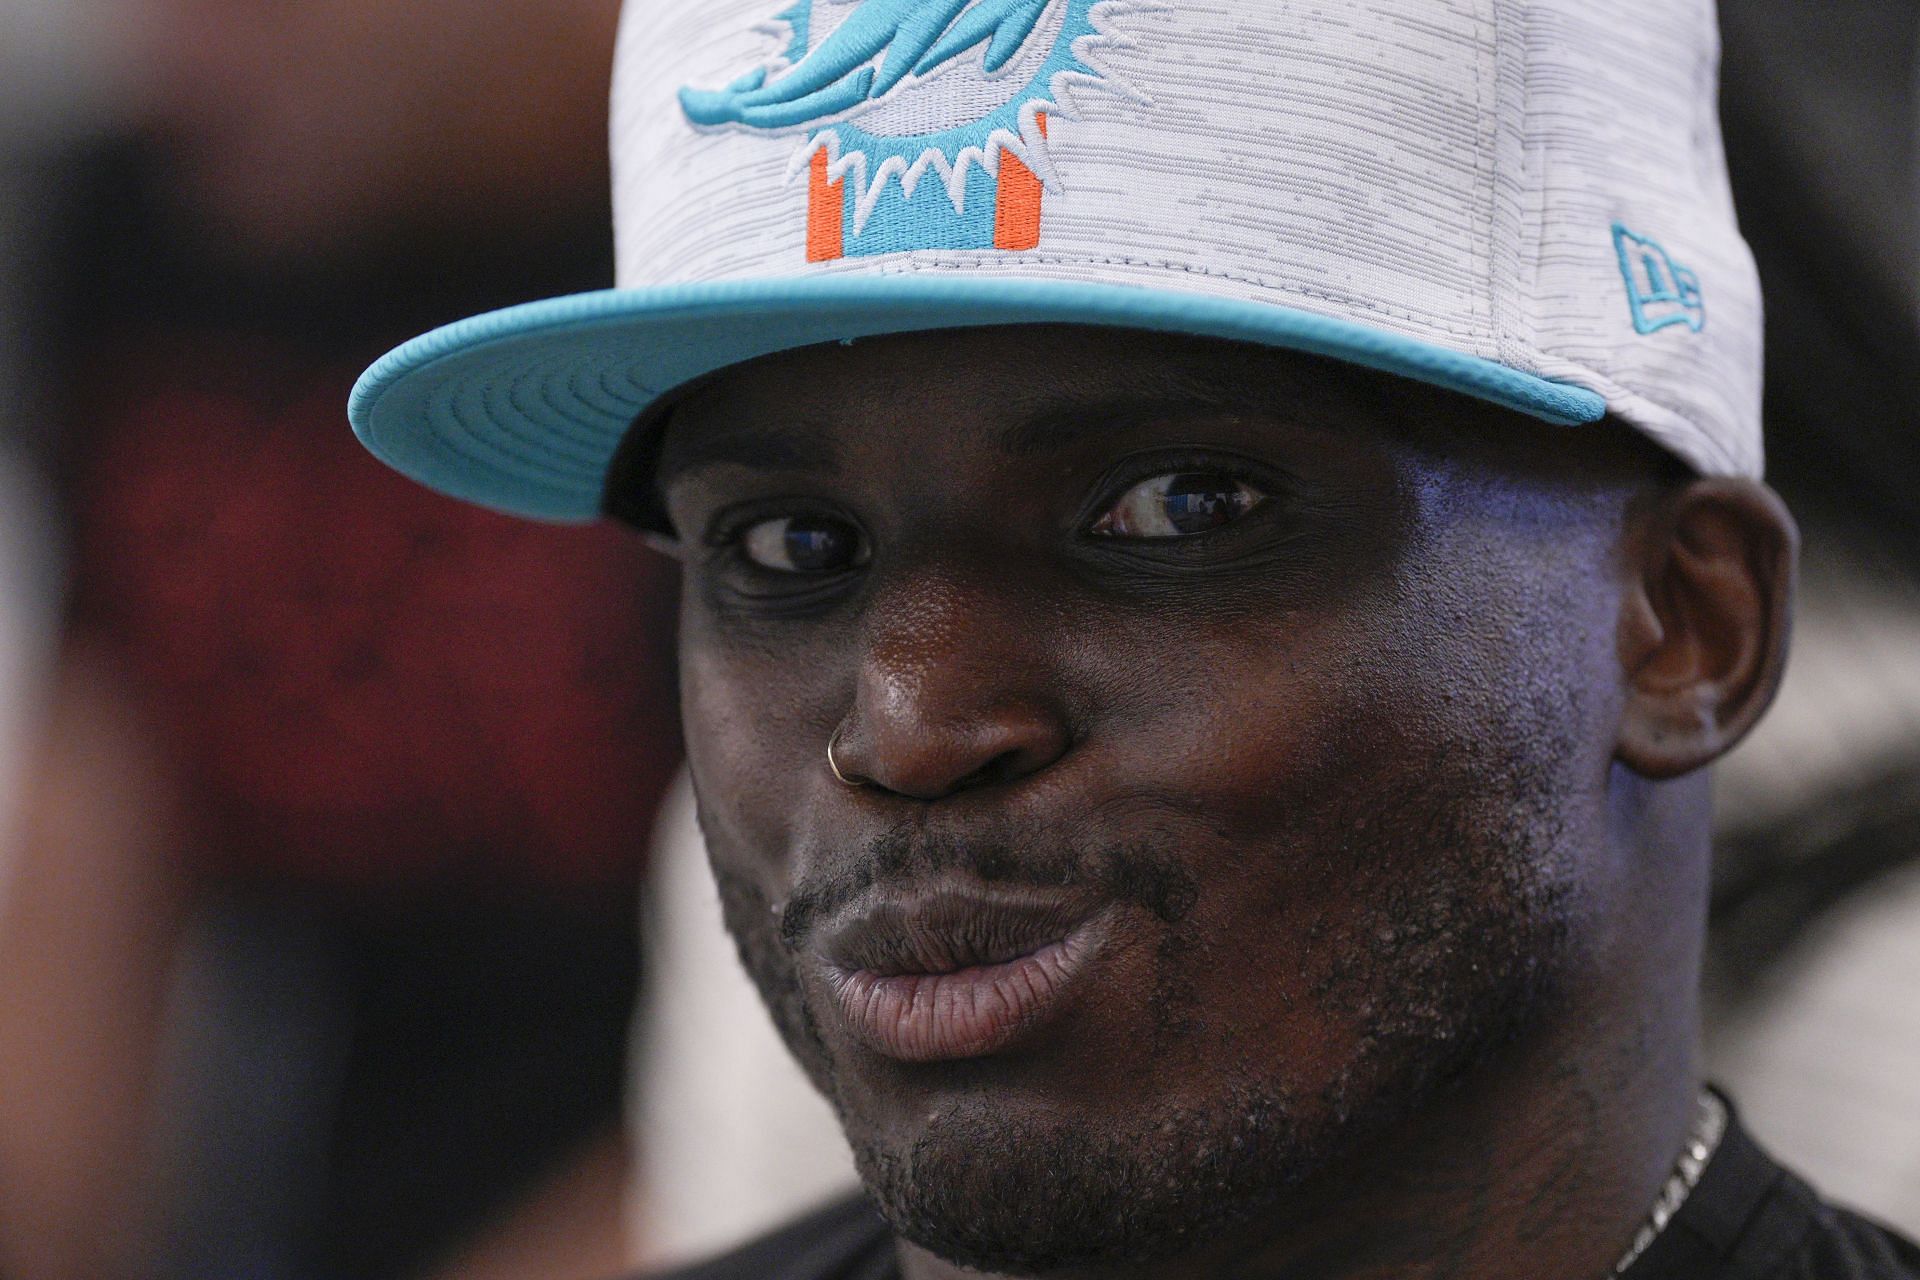 Miami Dolphins wide receiver Tyreek Hill.